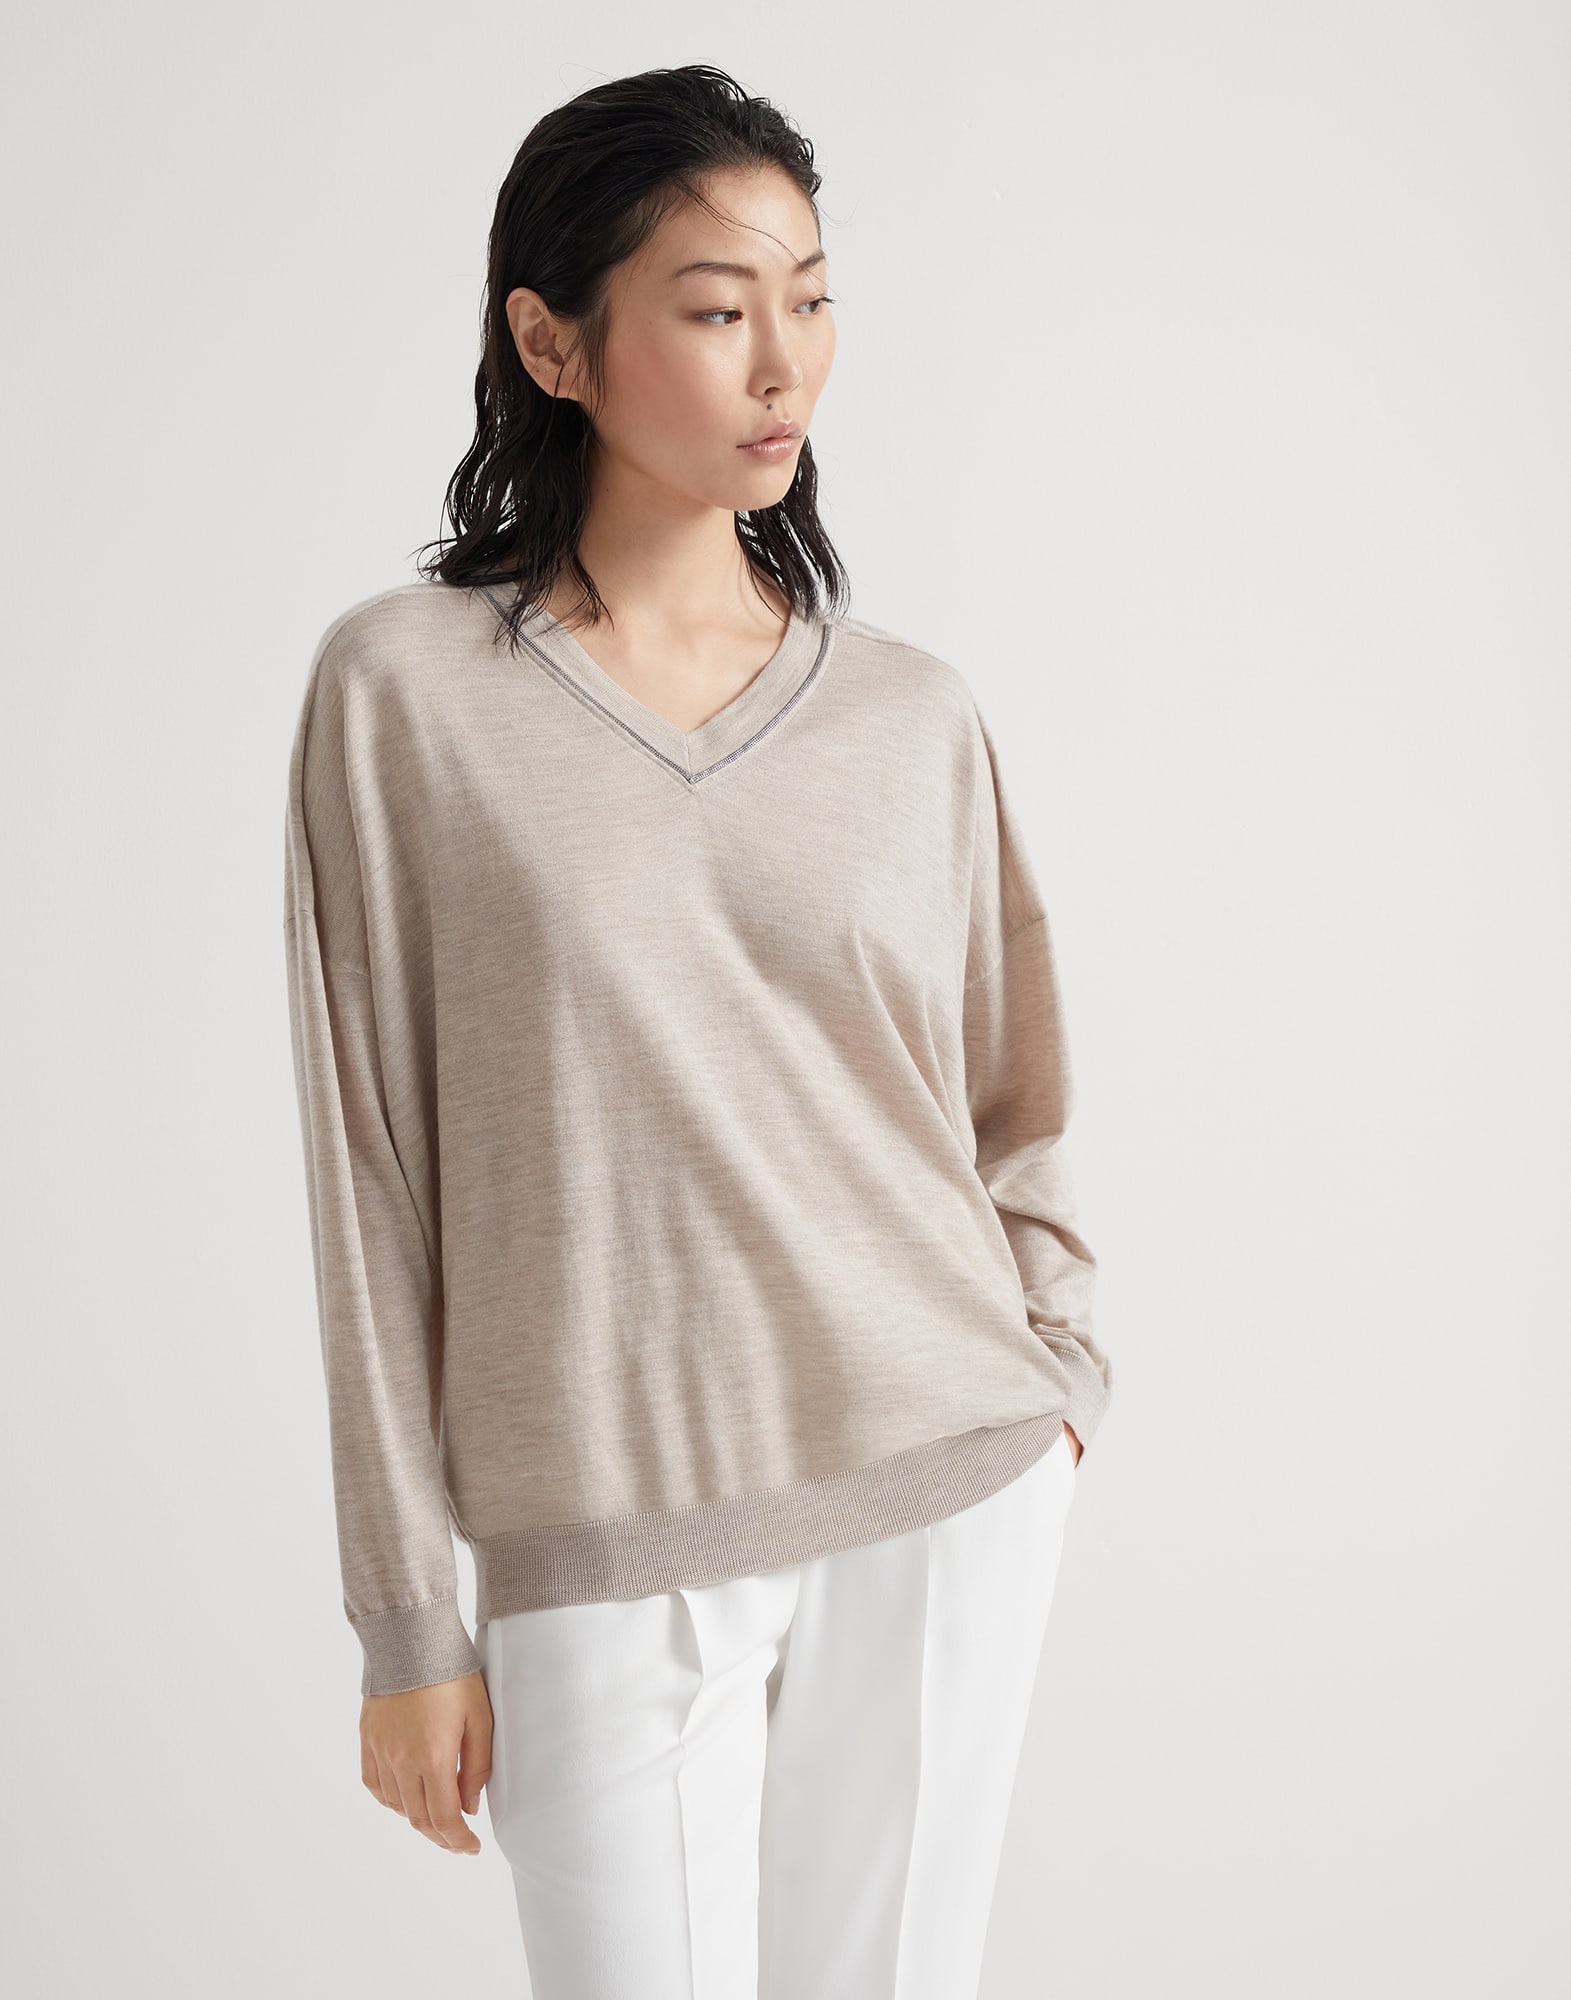 Cashmere and silk lightweight sweater with shiny collar trim - 1